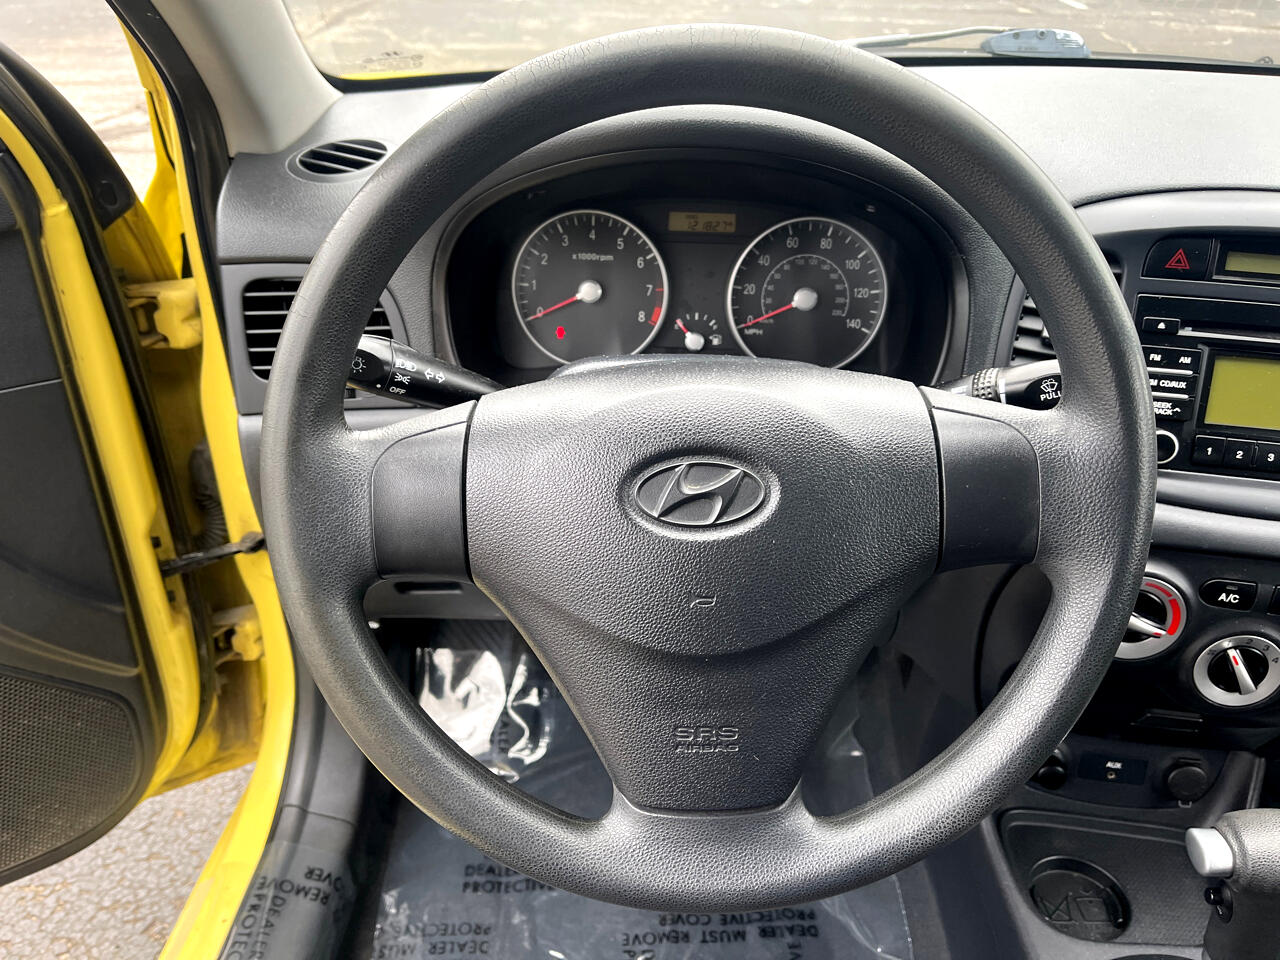 Used 2008 Hyundai Accent For Sale In Jacksonville, FL